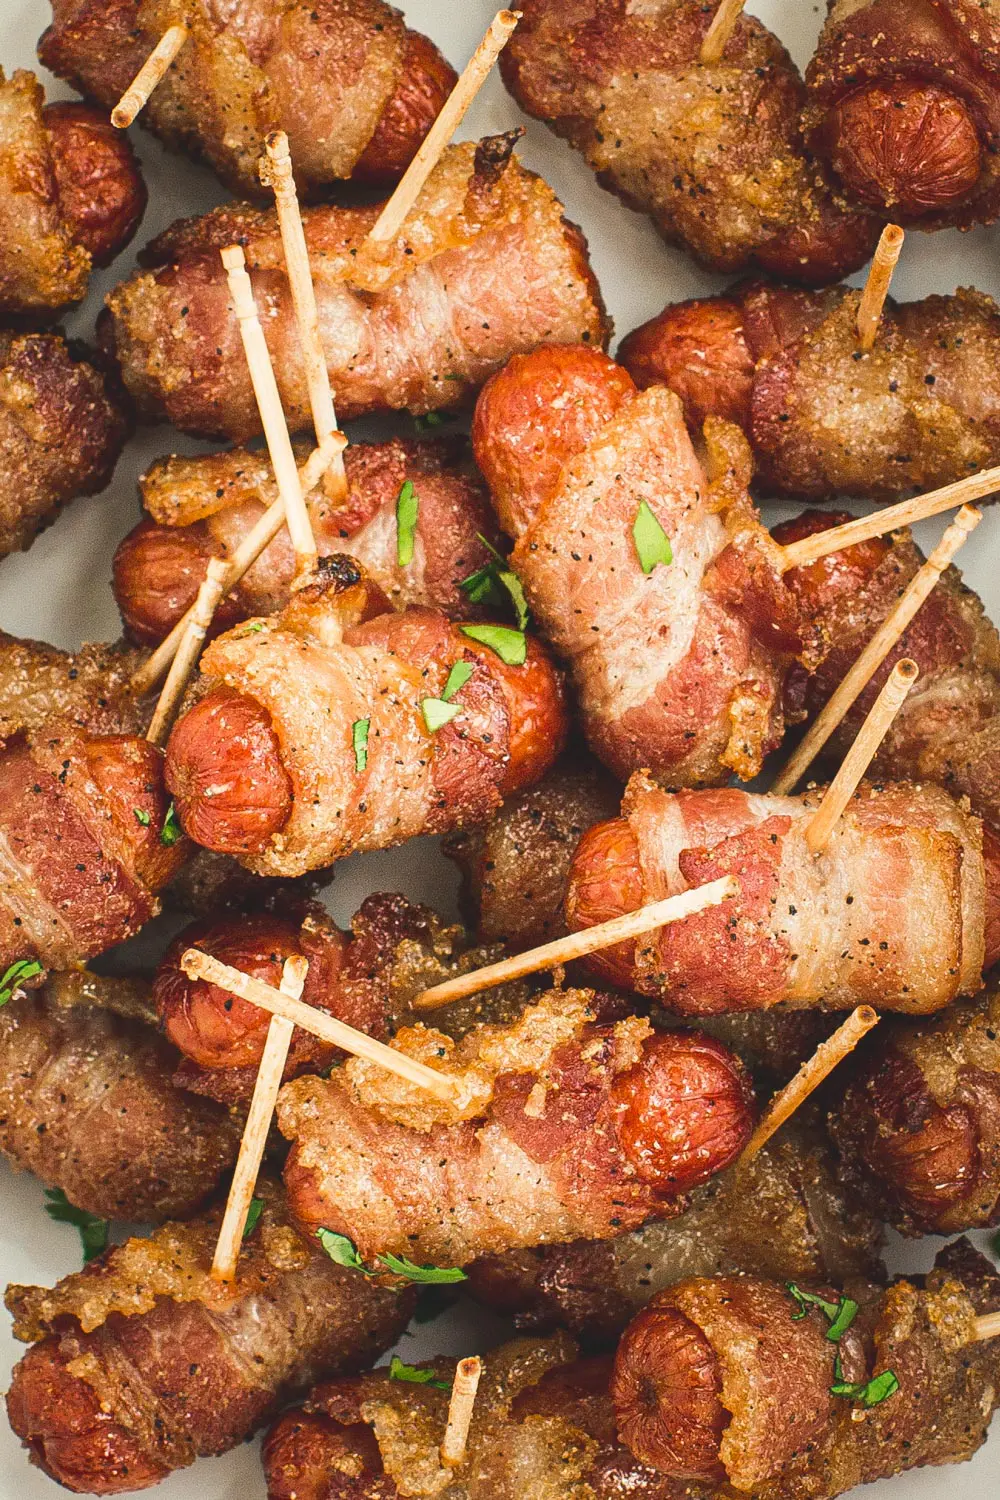 Toothpicks inserted into bacon-wrapped little smokies.